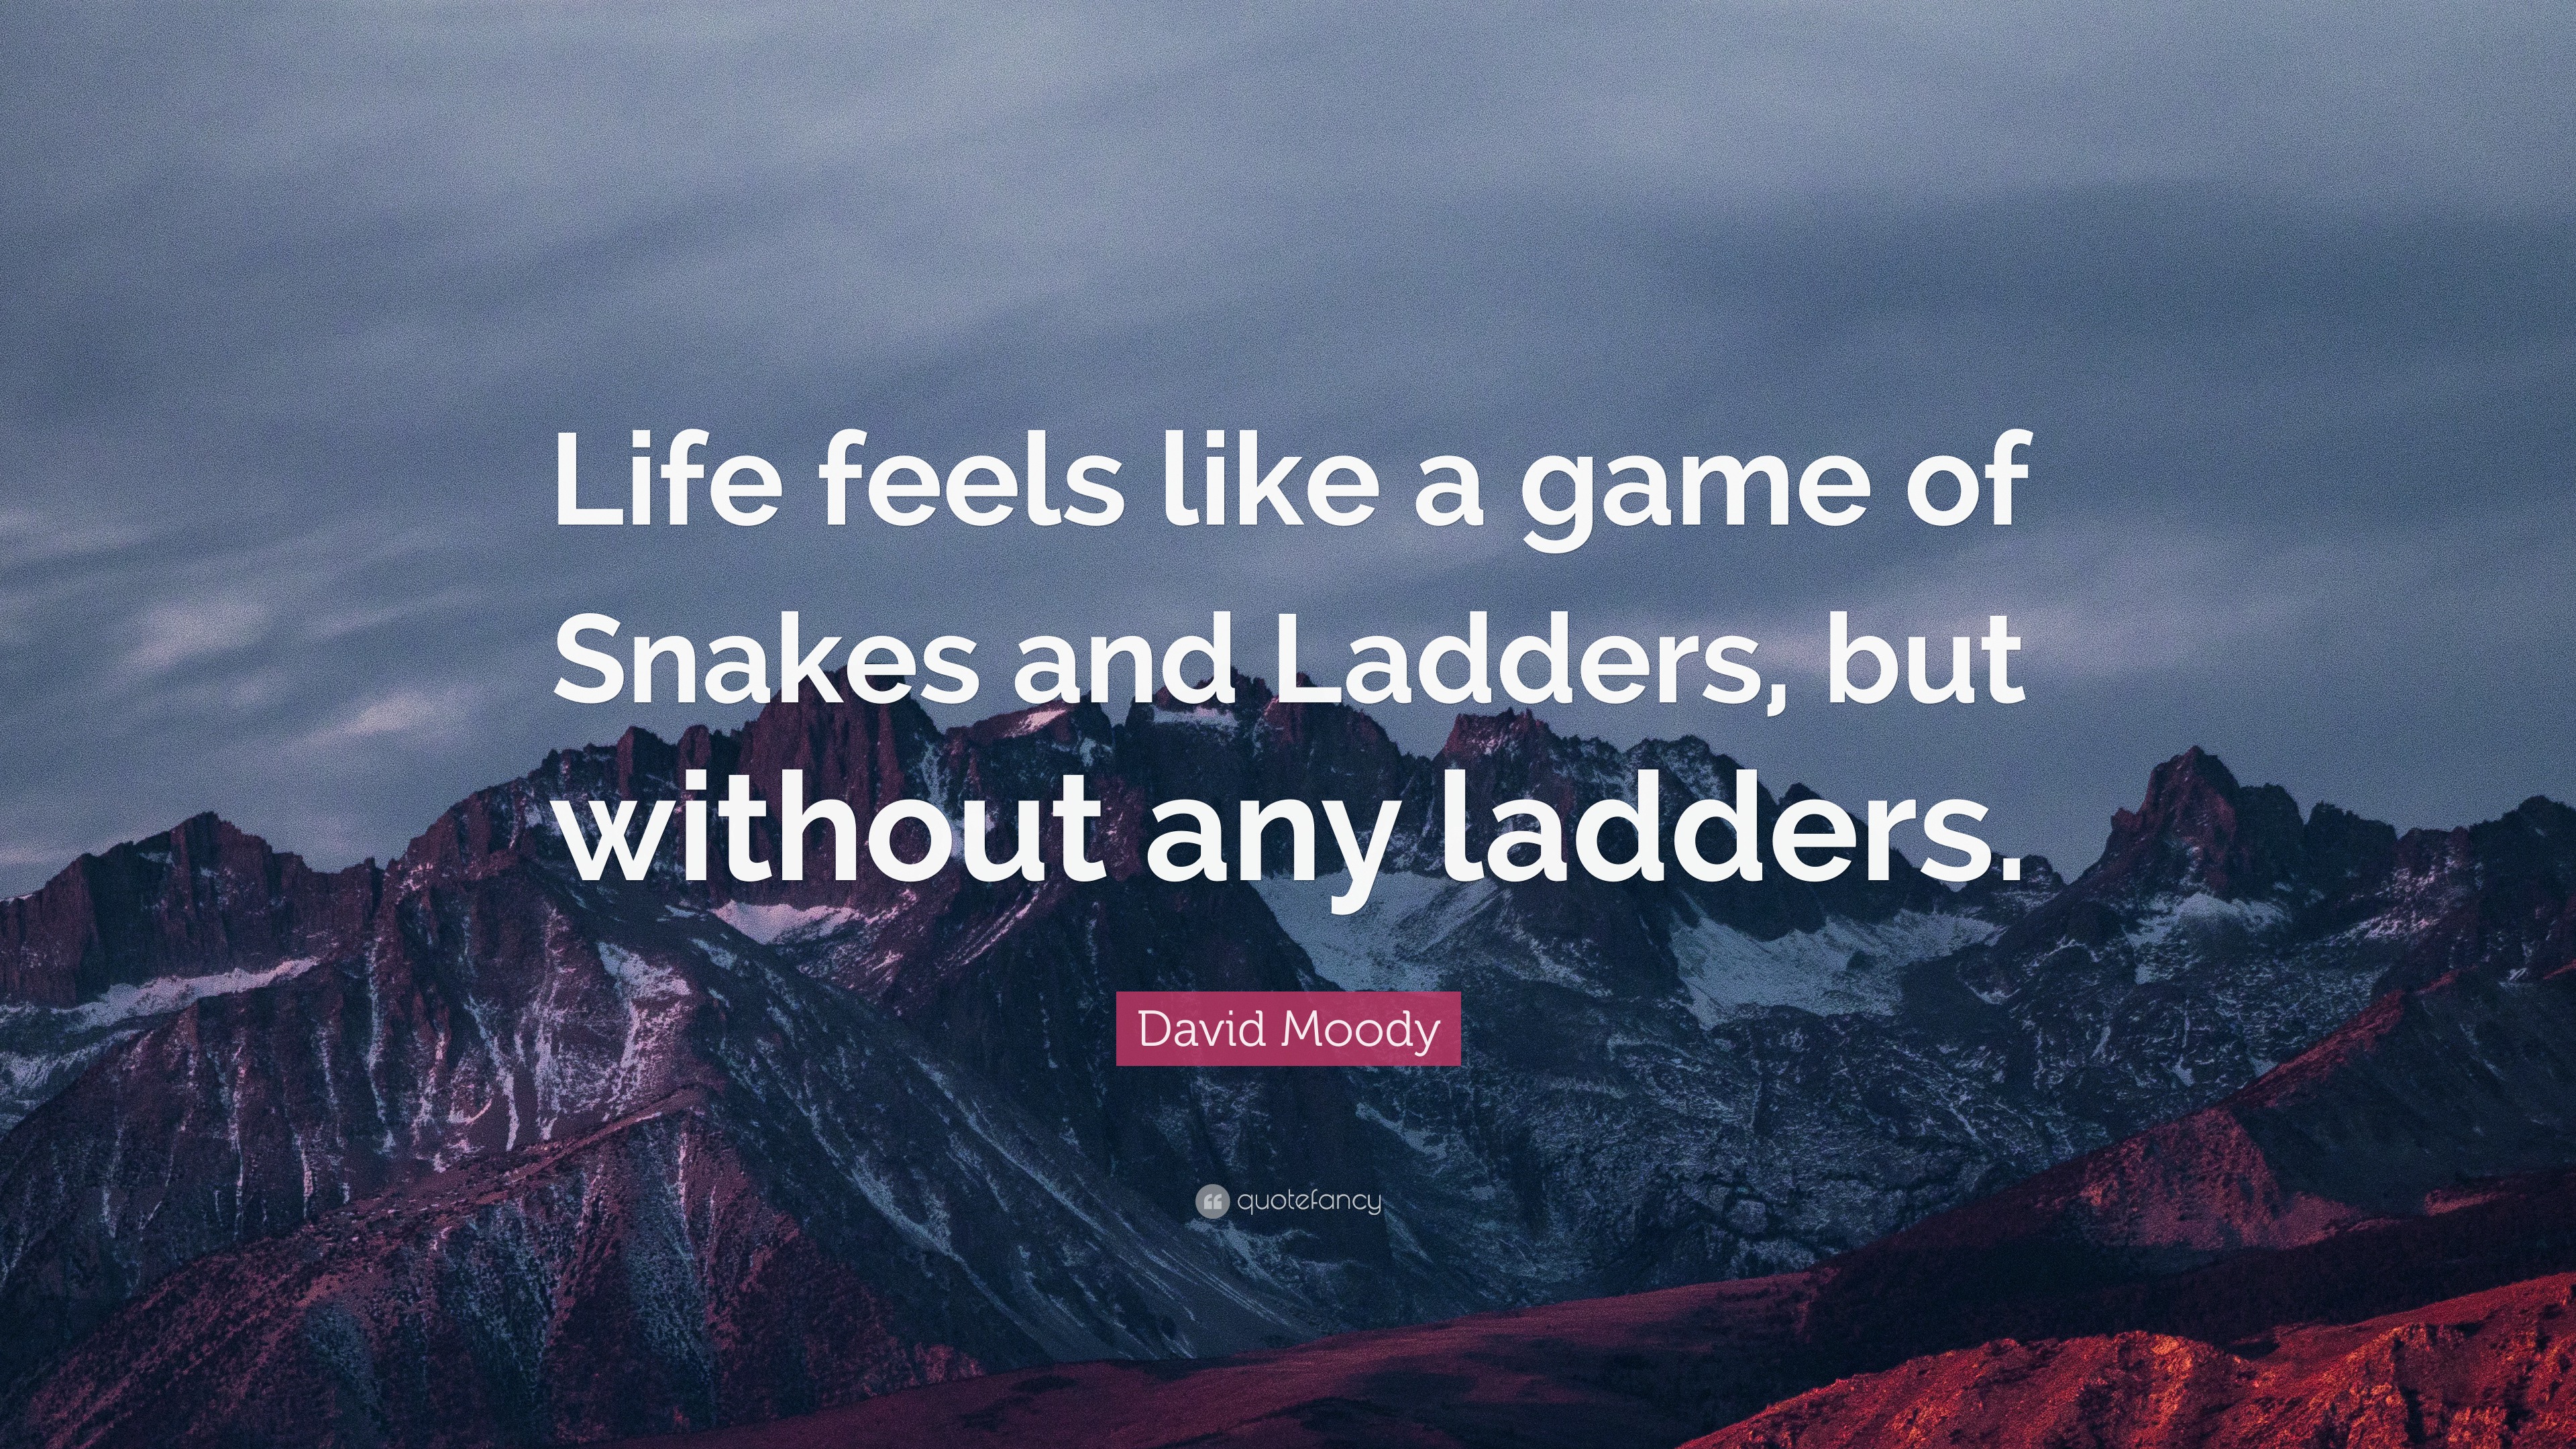 David Moody Quote “Life feels like a game of Snakes and Ladders but